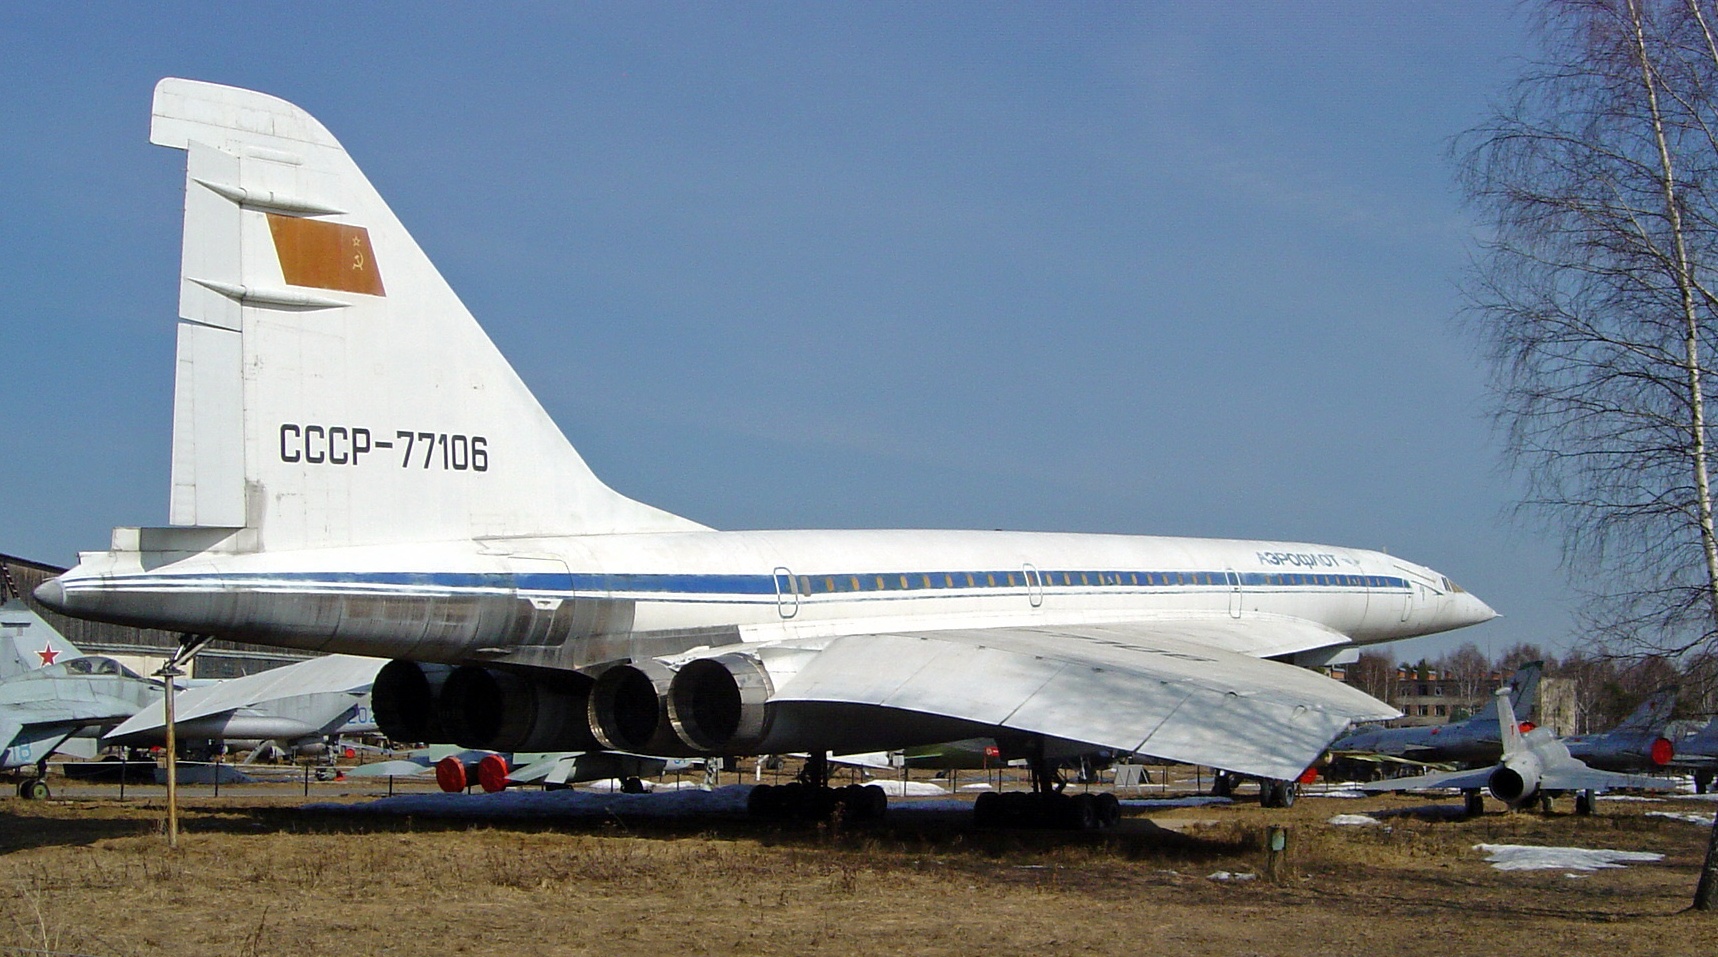 Tupolev Tu-144S 004-1, CCCP-77106, at the Central Aviation Museum Monino. (© Danner Gyde Poulsen)